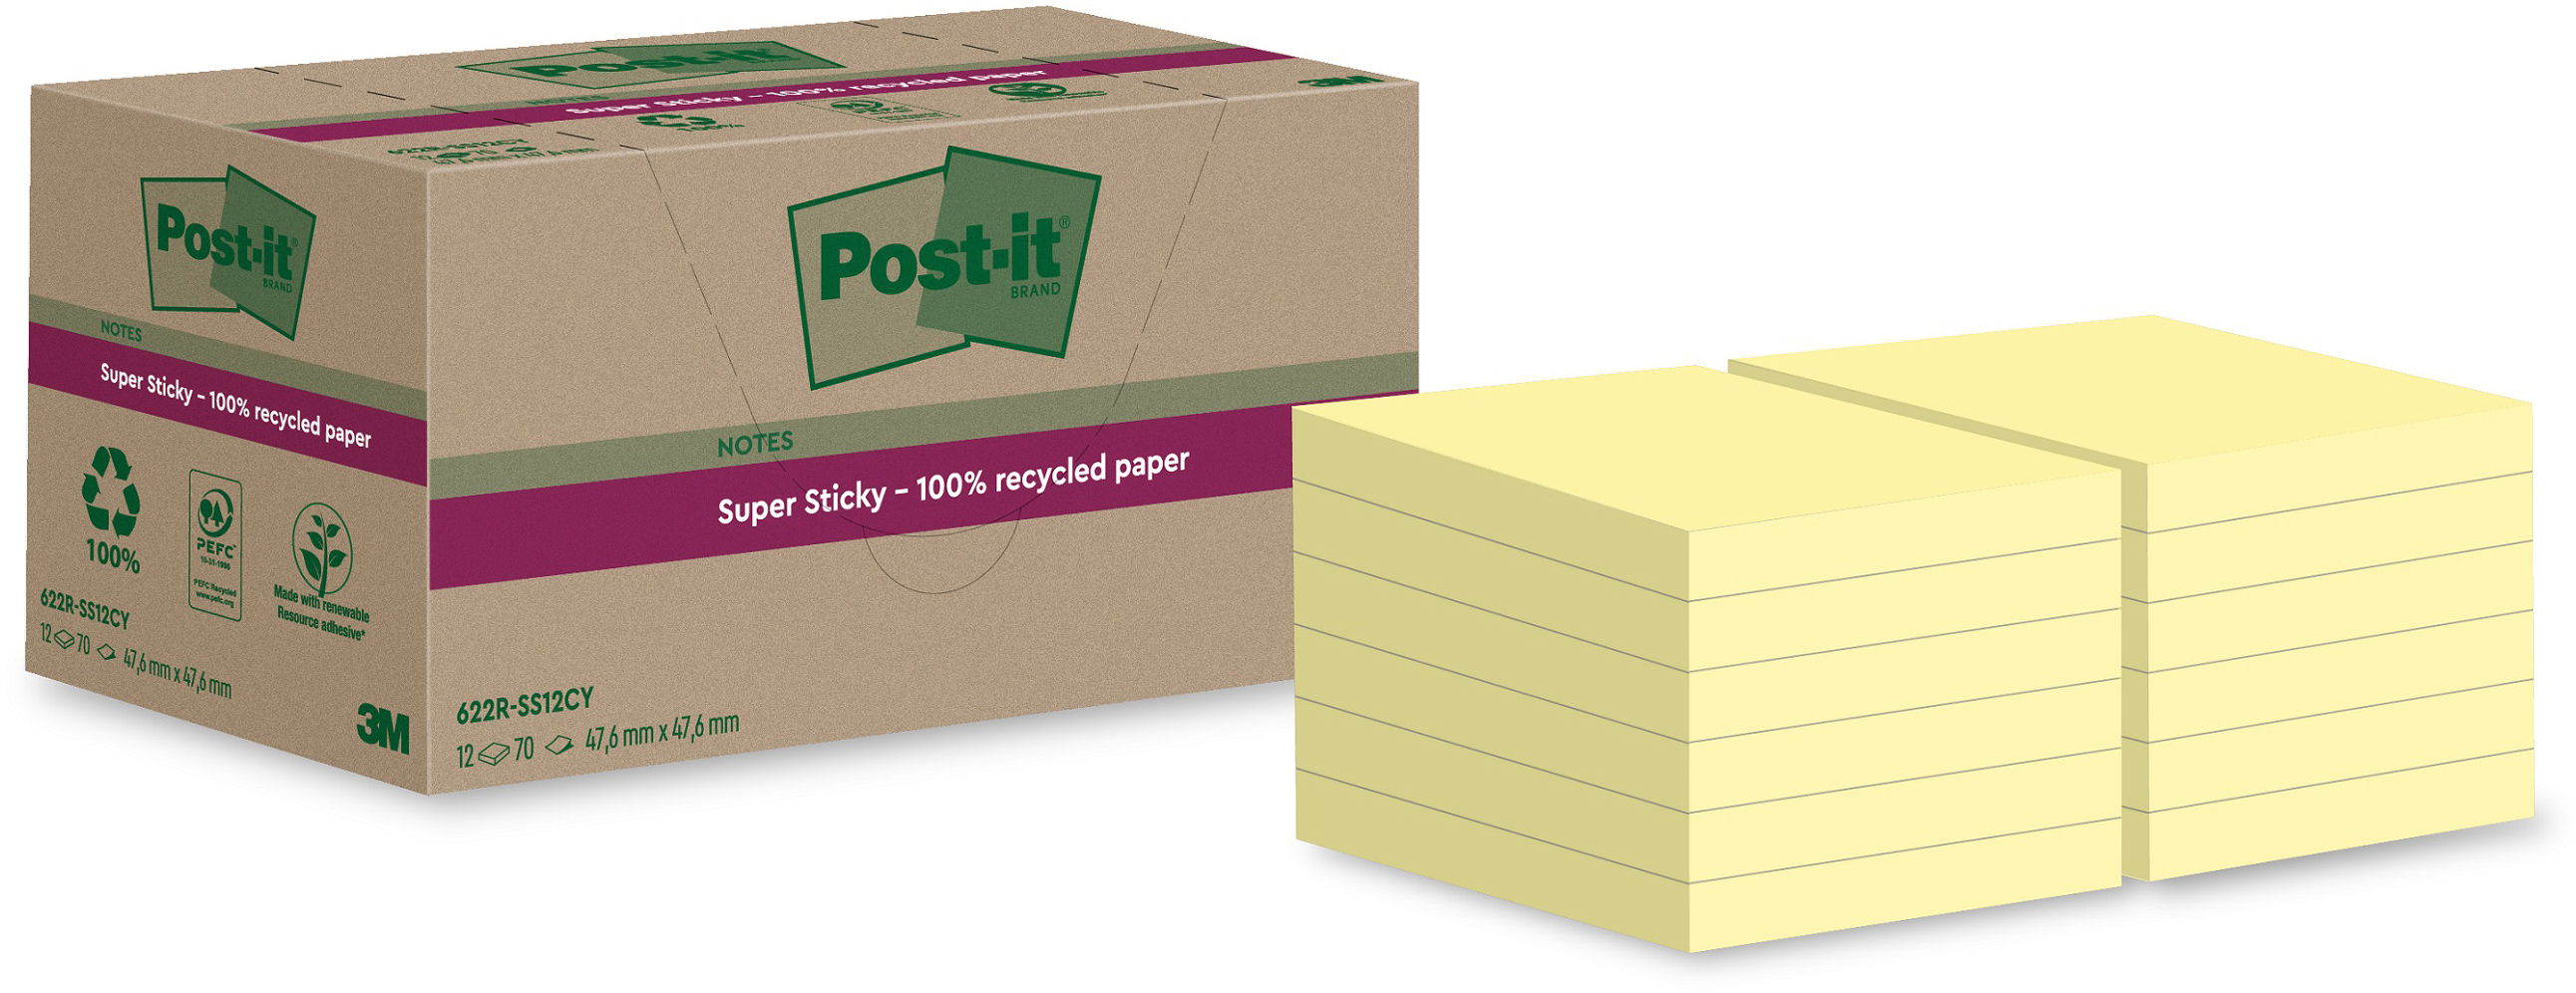 POST-IT SuperSticky Notes 47.6x47.6mm 622 RSS12CY Recycling,jaune 12x70 flls. Recycling,jaune 12x70 